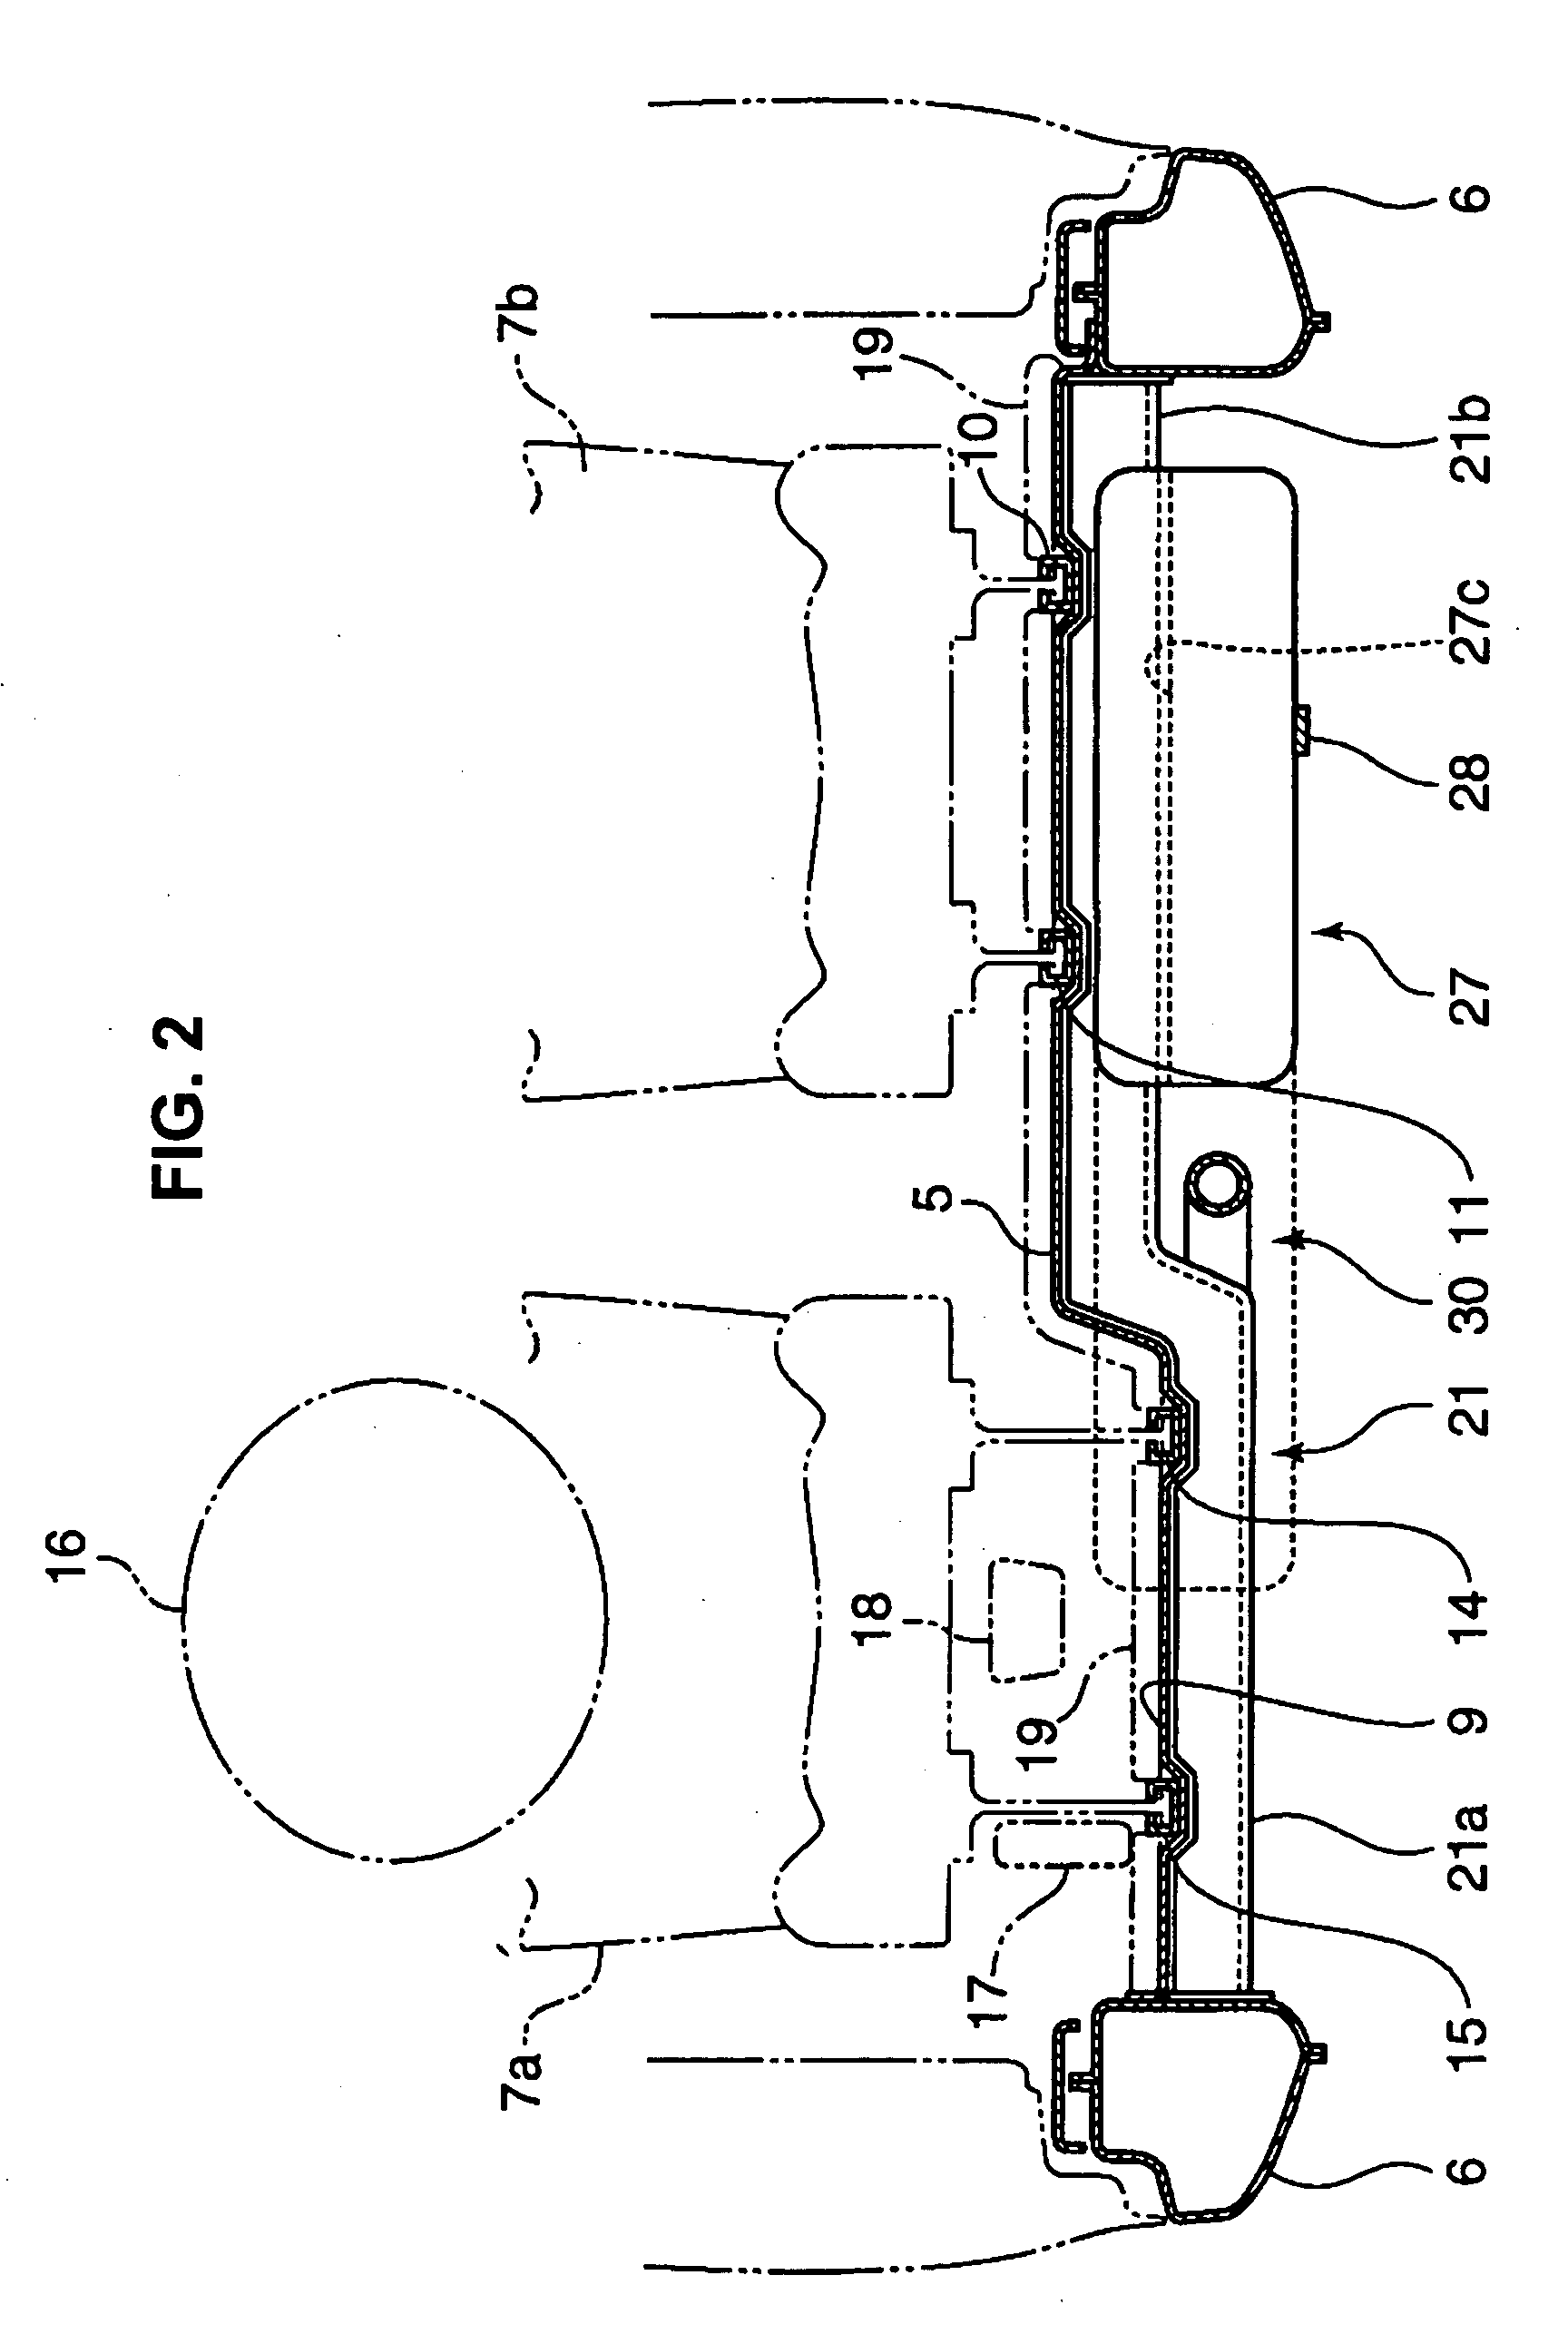 Seat device of vehicle